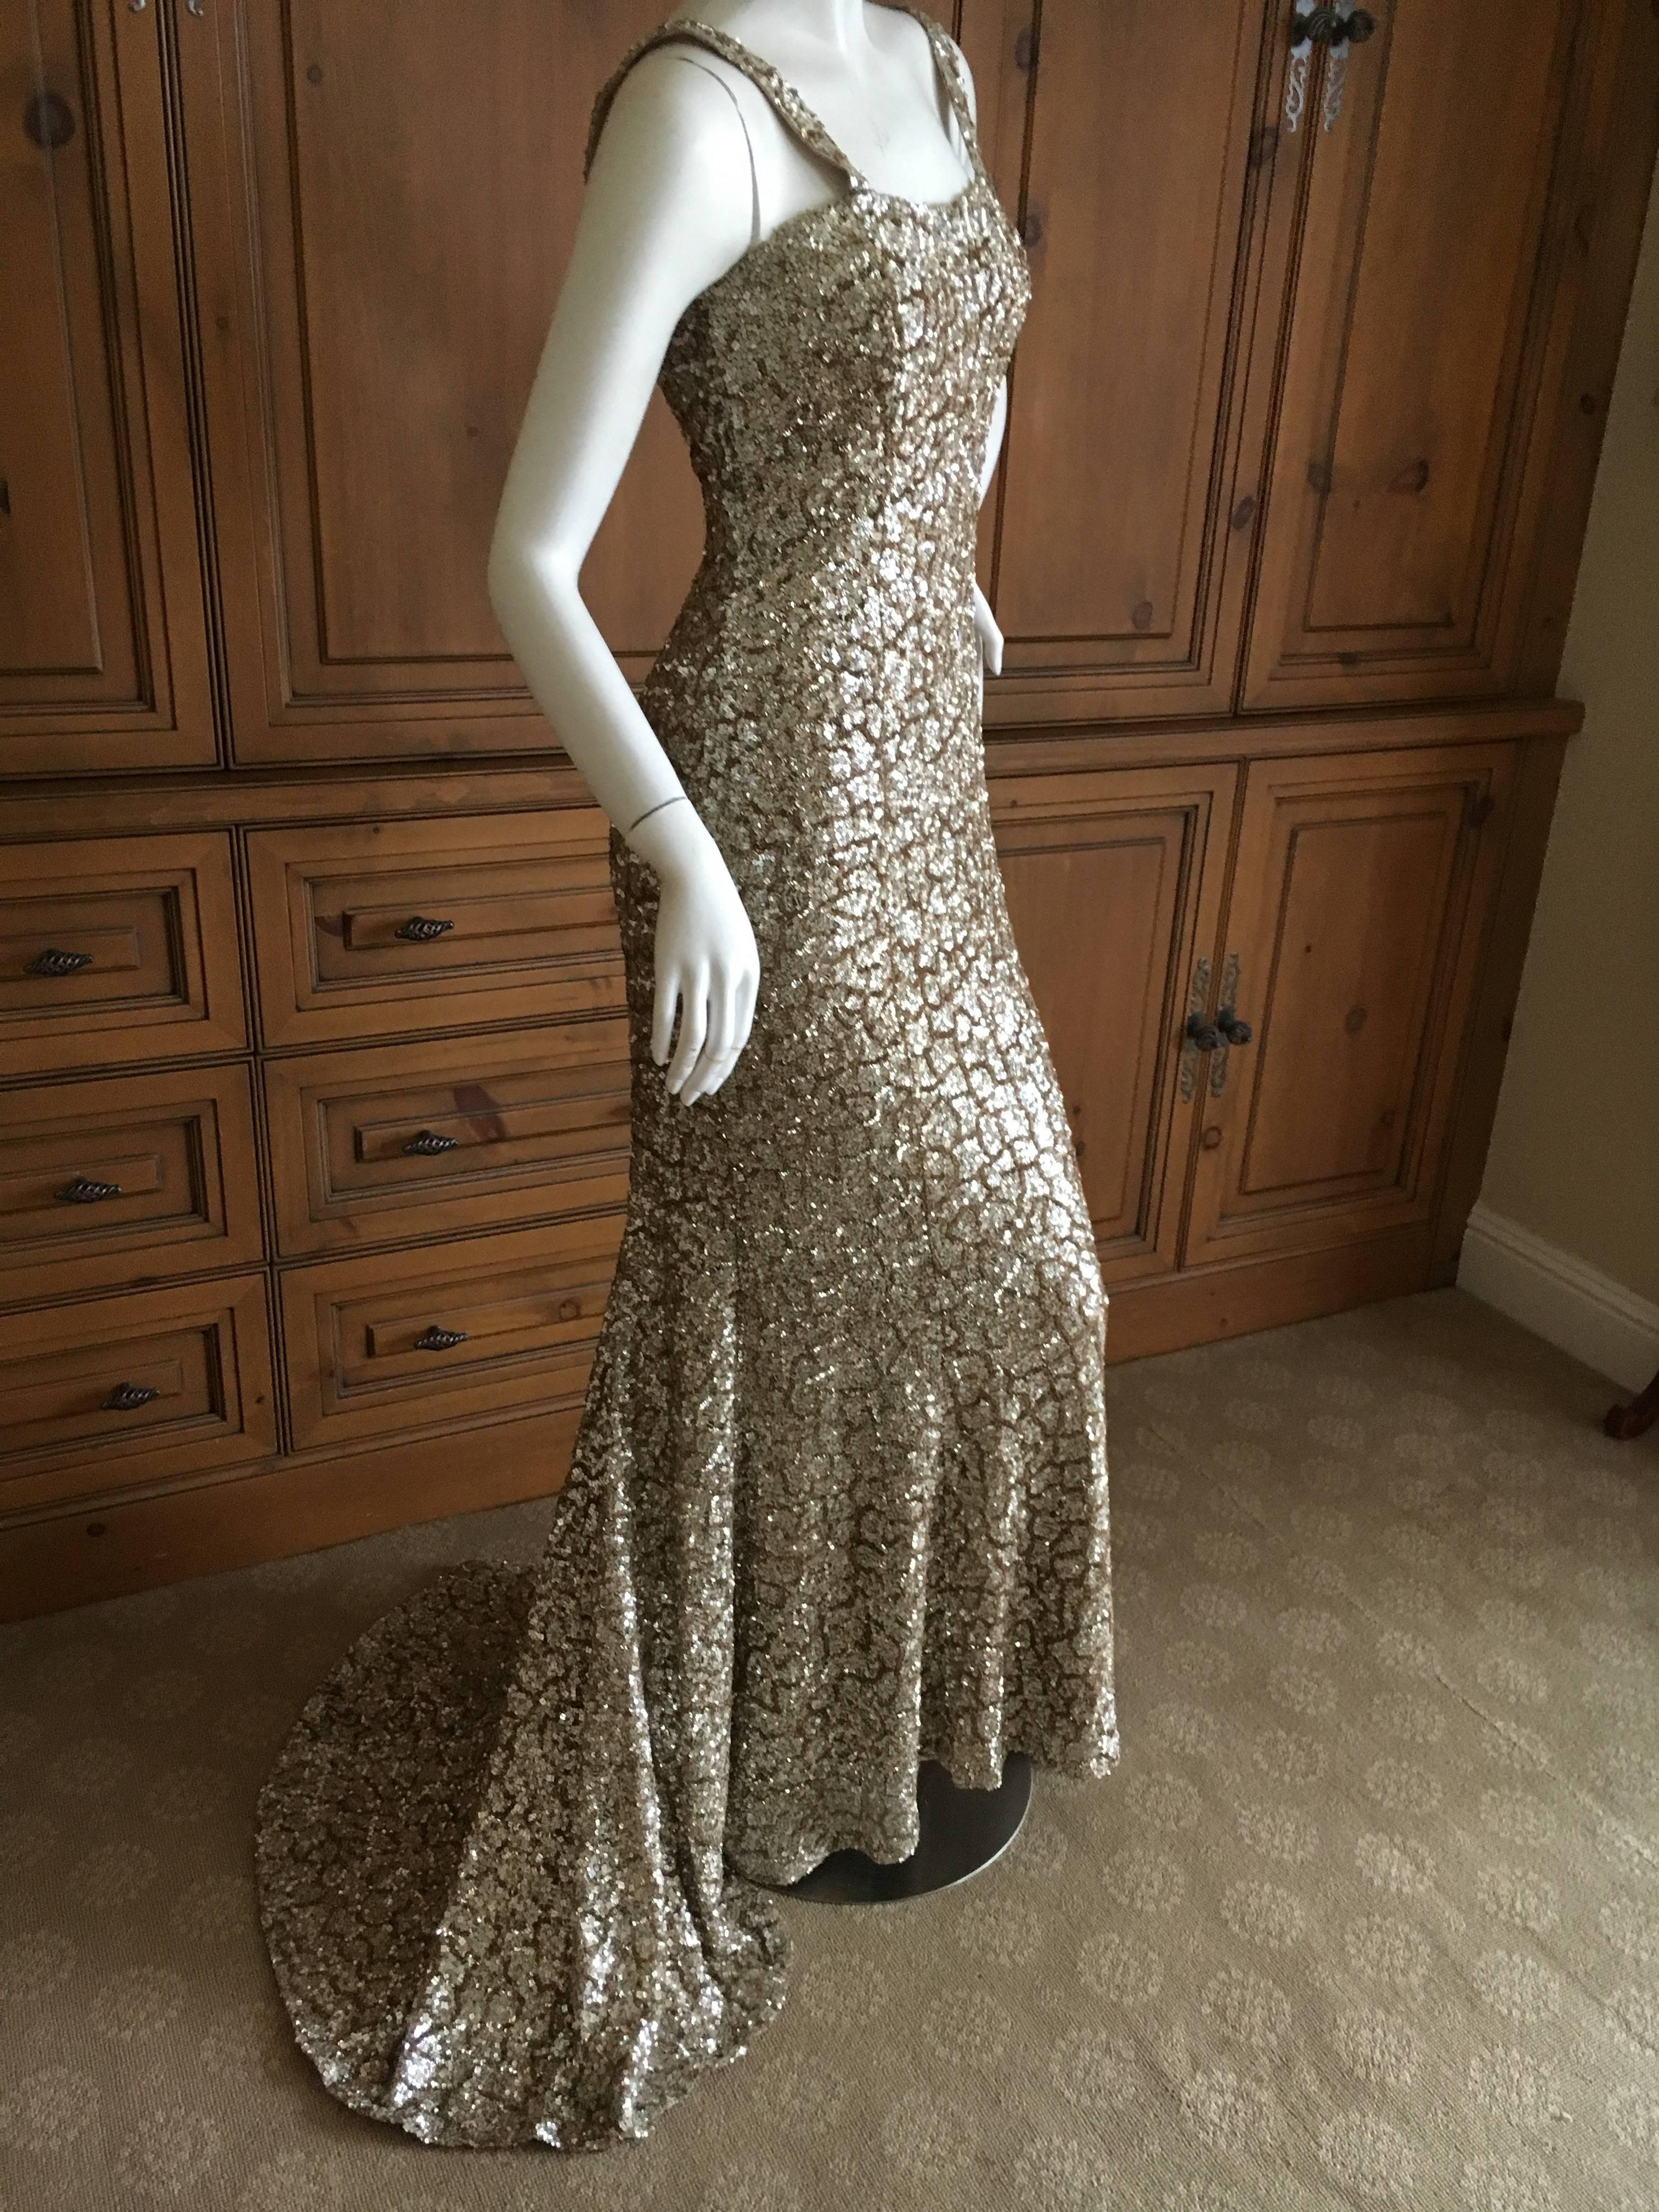 Monique Lhuillier Gold Sequin Mermaid Gown with Train In Excellent Condition For Sale In Cloverdale, CA